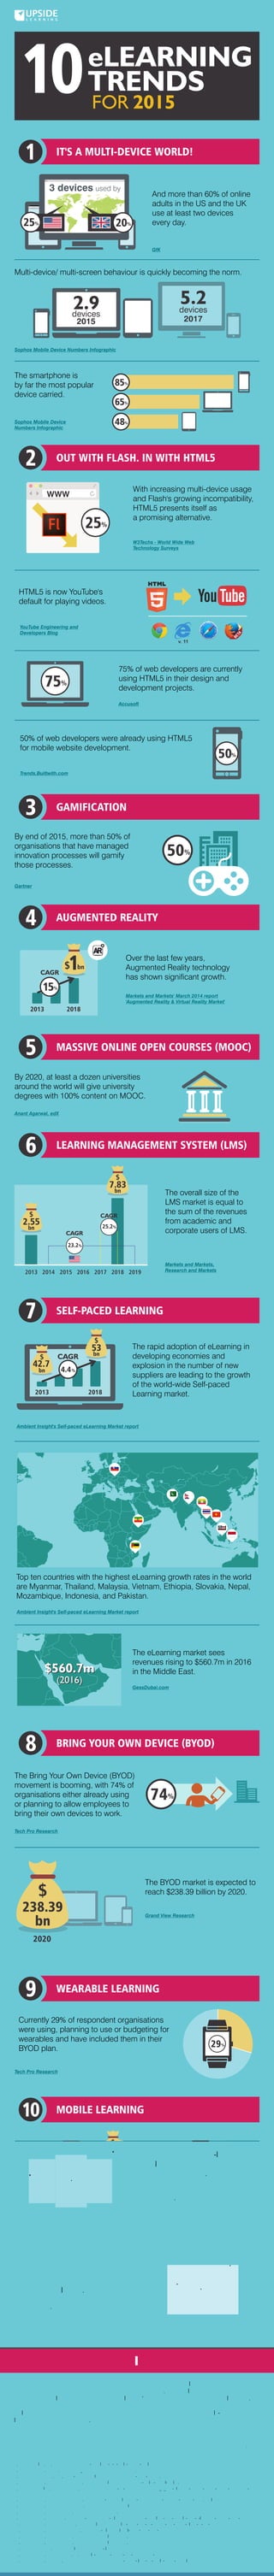 10eLEARNING
TRENDS
FOR 2015
IT'S A MULTI-DEVICE WORLD!
SUMMING UP
Organisations are adapting/ continuing to adopt eLearning, currently at a rate of 13% per year
(a pace that is projected to stay consistent through 2017). 2015 holds the promise for
expansion of online training both from the learner's perspective and organisational context.
To learn how your organisation can benefit from eLearning/ mLearning or multi-device
learning, get in touch with us.
1. http://blog.gfk.com/2014/03/finding-simplicity-in-a-multi-device-world/
2. http://www.pcmag.com/image_popup/0,1740,iid=371072,00.asp
3. http://dotgroup.com.br/wp-content/uploads/2014/04/Gartner-2020-Trends.pdf
4. http://www.marketsandmarkets.com/PressReleases/augmented-reality-virtual-reality.asp
5. http://articles.economictimes.indiatimes.com/2015-01-16/news/58149756_1_edx-platform-moocs-indian-higher-education-
system
6. http://www.marketsandmarkets.com/Market-Reports/learning-management-systems-market-1266.html
7. http://www.researchandmarkets.com/research/3m6wpn/learning
8. http://www.ambientinsight.com/Reports/eLearning.aspx
9. http://www.gessdubai.com/news-center/press-releases/education-suppliers-turn-middle-east-e-learning-market-sees-revenues
10. http://www.techproresearch.com/downloads/wearables-byod-and-iot-current-and-future-plans-in-the-enterprise/
11. http://www.grandviewresearch.com/press-release/global-bring-your-own-device
12. http://www.ambientinsight.com/Reports/MobileLearning.aspx#section1
13. http://www.ambientinsight.com/Reports/MobileLearning.aspx#section3
14. http://w3techs.com/technologies/report/cp-flash
15. http://www.designbysoap.co.uk/html5-benefits-usage-and-predictions-infographic/
16. http://www.theverge.com/2015/1/27/7926001/youtube-drops-flash-for-html5-video-default
References
Infographic by
www.upsidelearning.com
And more than 60% of online
adults in the US and the UK
use at least two devices
every day.
1
Multi-device/ multi-screen behaviour is quickly becoming the norm.
The smartphone is
by far the most popular
device carried.
Sophos Mobile Device Numbers Infographic
Sophos Mobile Device
Numbers Infographic
OUT WITH FLASH. IN WITH HTML52
With increasing multi-device usage
and Flash's growing incompatibility,
HTML5 presents itself as
a promising alternative.
W3Techs - World Wide Web
Technology Surveys
GAMIFICATION3
By end of 2015, more than 50% of
organisations that have managed
innovation processes will gamify
those processes.
Gartner
AUGMENTED REALITY4
Over the last few years,
Augmented Reality technology
has shown significant growth.
Markets and Markets' March 2014 report
'Augmented Reality & Virtual Reality Market'
GfK
MASSIVE ONLINE OPEN COURSES (MOOC)5
By 2020, at least a dozen universities
around the world will give university
degrees with 100% content on MOOC.
Anant Agarwal, edX
LEARNING MANAGEMENT SYSTEM (LMS)6
SELF-PACED LEARNING7
The rapid adoption of eLearning in
developing economies and
explosion in the number of new
suppliers are leading to the growth
of the world-wide Self-paced
Learning market.
Ambient Insight's Self-paced eLearning Market report
Top ten countries with the highest eLearning growth rates in the world
are Myanmar, Thailand, Malaysia, Vietnam, Ethiopia, Slovakia, Nepal,
Mozambique, Indonesia, and Pakistan.
Ambient Insight's Self-paced eLearning Market report
BRING YOUR OWN DEVICE (BYOD)8
WEARABLE LEARNING9
MOBILE LEARNING10
The eLearning market sees
revenues rising to $560.7m in 2016
in the Middle East.
GessDubai.com
$560.7m
(2016)
$560.7m
(2016)
The Bring Your Own Device (BYOD)
movement is booming, with 74% of
organisations either already using
or planning to allow employees to
bring their own devices to work.
Tech Pro Research
Currently 29% of respondent organisations
were using, planning to use or budgeting for
wearables and have included them in their
BYOD plan.
Tech Pro Research
China was the second-largest
Mobile Learning buying country
after the US in 2014.
Ambient Insight's 2013-2018 North
America Mobile Edugame Market research
The number of
new edugames coming
to the North American
market is exploding.
Ambient Insight's 2013-2018 North
America Mobile Edugame Market research
2014 2019
HTML5 is now YouTube's
default for playing videos.
75% of web developers are currently
using HTML5 in their design and
development projects.
Accusoft
50% of web developers were already using HTML5
for mobile website development.
Trends.Builtwith.com
YouTube Engineering and
Developers Blog
5.22.9devices
2015
devices
2017
The BYOD market is expected to
reach $238.39 billion by 2020.
Grand View Research
85%
65%
48%
25% 20%
50%
74%
2018
$1bn
CAGR
2013 2014 2015 2016 2017 2018 2019
$
2.55
bn
$
7.83
bn
23.2%
25.2%
CAGR
The overall size of the
LMS market is equal to
the sum of the revenues
from academic and
corporate users of LMS.
Markets and Markets,
Research and Markets
20182013
CAGR
29%
$
1.1
bn
$
2.3
bn
CAGR
15.4%
20182013
CAGR$
227.9
mn
$
410.27
mn
WWW
25%
75%
50%
2013
12.5%
4.4%
CAGR
15%
$
238.39
bn
2020
$
42.7
bn
$
53
bn
v. 11
3 devices used by
 